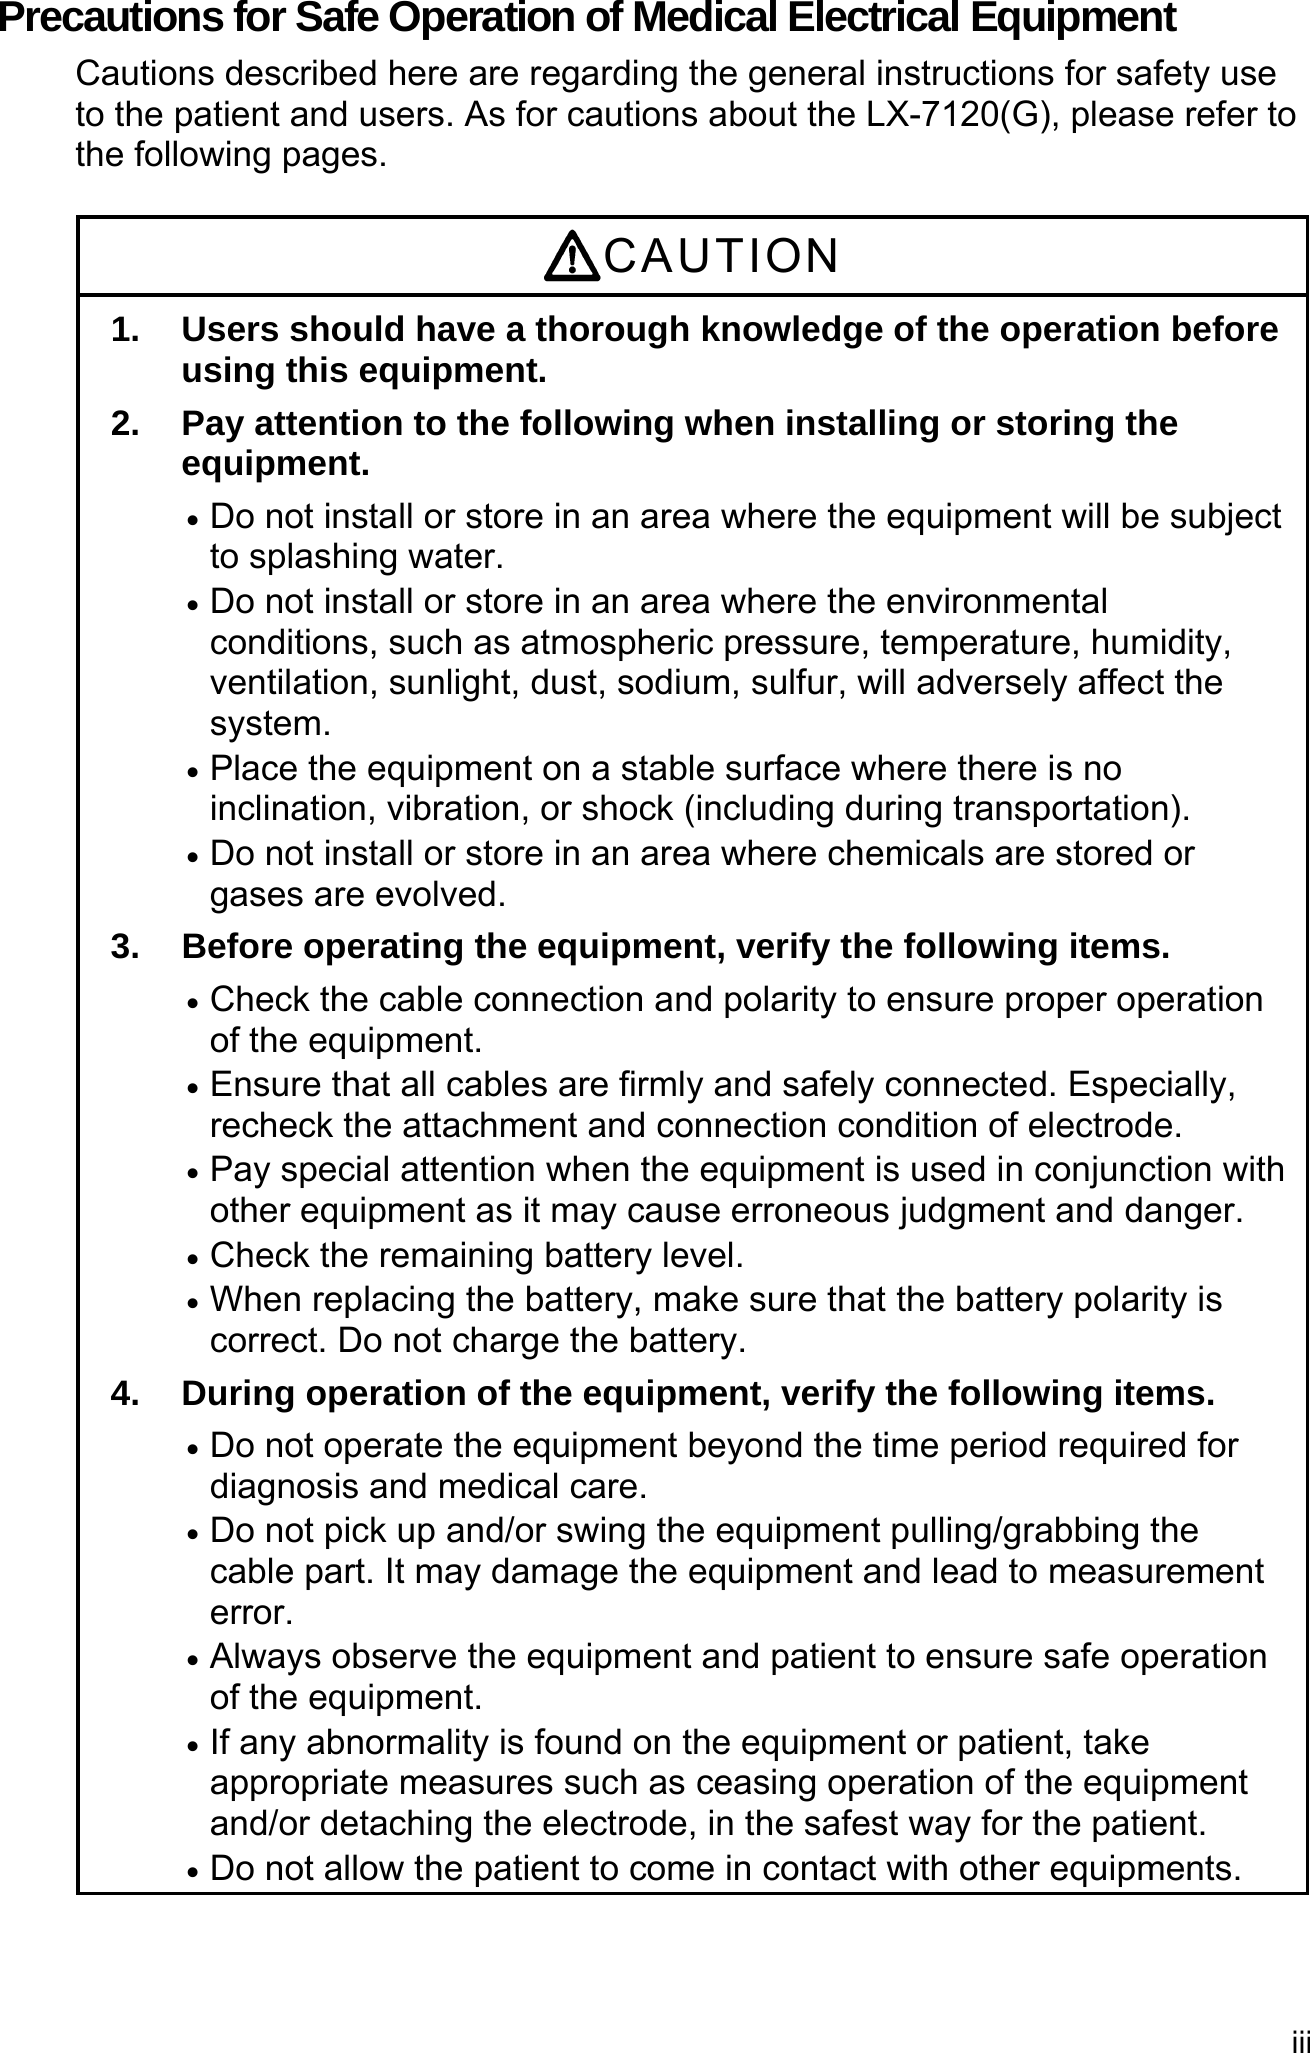 iii  Precautions for Safe Operation of Medical Electrical Equipment Cautions described here are regarding the general instructions for safety use to the patient and users. As for cautions about the LX-7120(G), please refer to the following pages.  CAUTION 1.  Users should have a thorough knowledge of the operation before using this equipment. 2. Pay attention to the following when installing or storing the equipment.  Do not install or store in an area where the equipment will be subject to splashing water.  Do not install or store in an area where the environmental conditions, such as atmospheric pressure, temperature, humidity, ventilation, sunlight, dust, sodium, sulfur, will adversely affect the system.  Place the equipment on a stable surface where there is no inclination, vibration, or shock (including during transportation).  Do not install or store in an area where chemicals are stored or gases are evolved. 3.  Before operating the equipment, verify the following items.  Check the cable connection and polarity to ensure proper operation of the equipment.  Ensure that all cables are firmly and safely connected. Especially, recheck the attachment and connection condition of electrode.  Pay special attention when the equipment is used in conjunction with other equipment as it may cause erroneous judgment and danger.  Check the remaining battery level.  When replacing the battery, make sure that the battery polarity is correct. Do not charge the battery. 4.  During operation of the equipment, verify the following items.  Do not operate the equipment beyond the time period required for diagnosis and medical care.  Do not pick up and/or swing the equipment pulling/grabbing the cable part. It may damage the equipment and lead to measurement error.  Always observe the equipment and patient to ensure safe operation of the equipment.  If any abnormality is found on the equipment or patient, take appropriate measures such as ceasing operation of the equipment and/or detaching the electrode, in the safest way for the patient.  Do not allow the patient to come in contact with other equipments. 